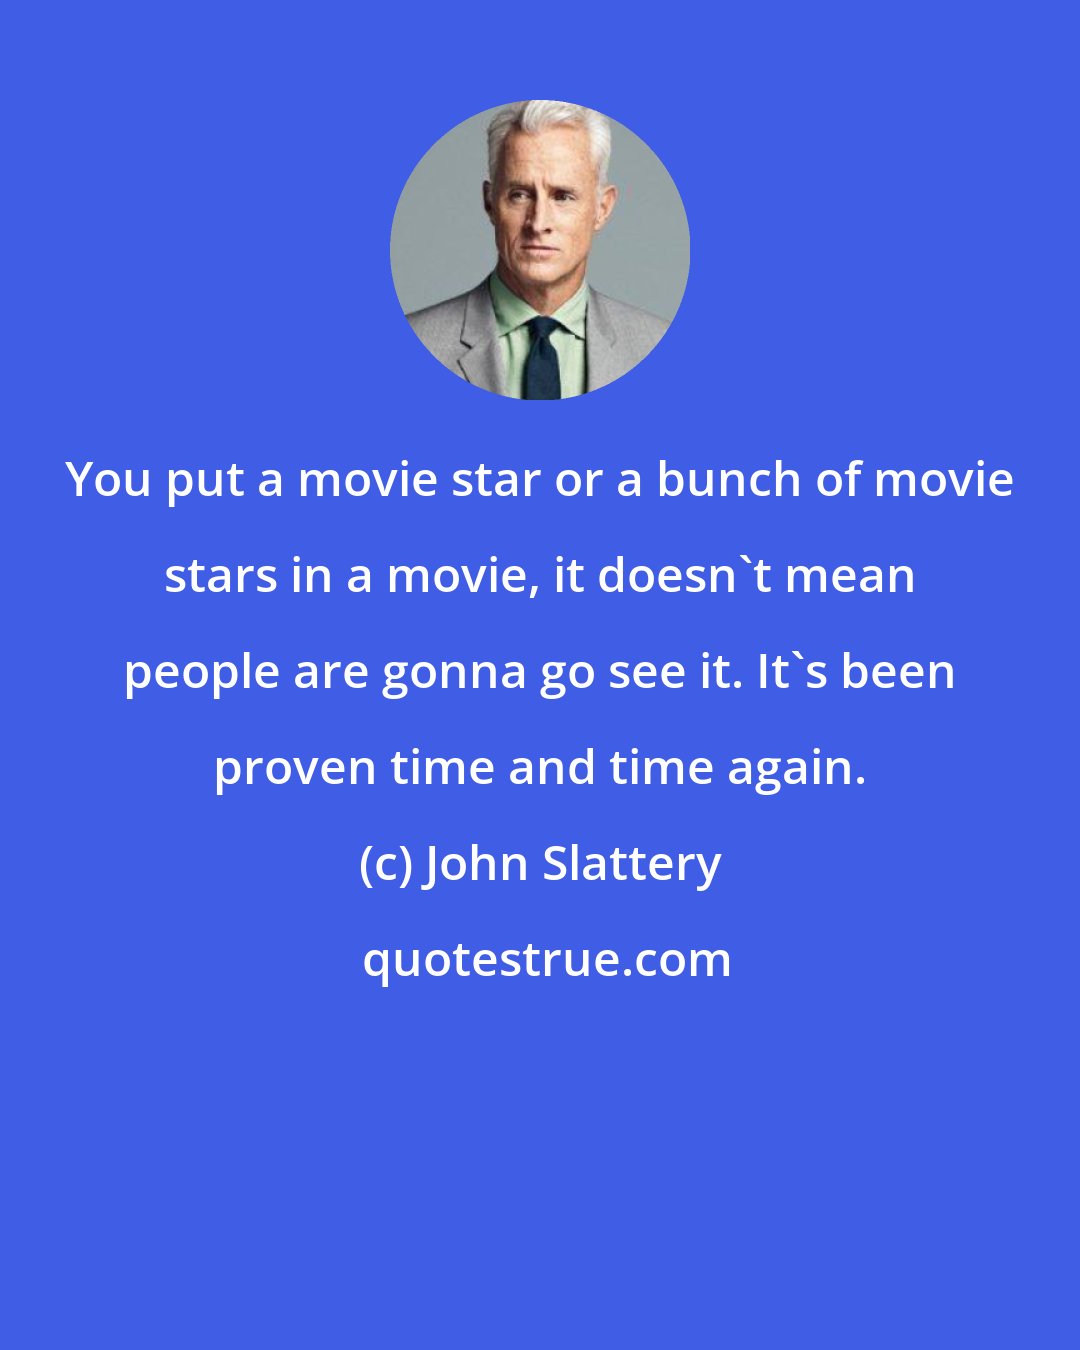 John Slattery: You put a movie star or a bunch of movie stars in a movie, it doesn't mean people are gonna go see it. It's been proven time and time again.